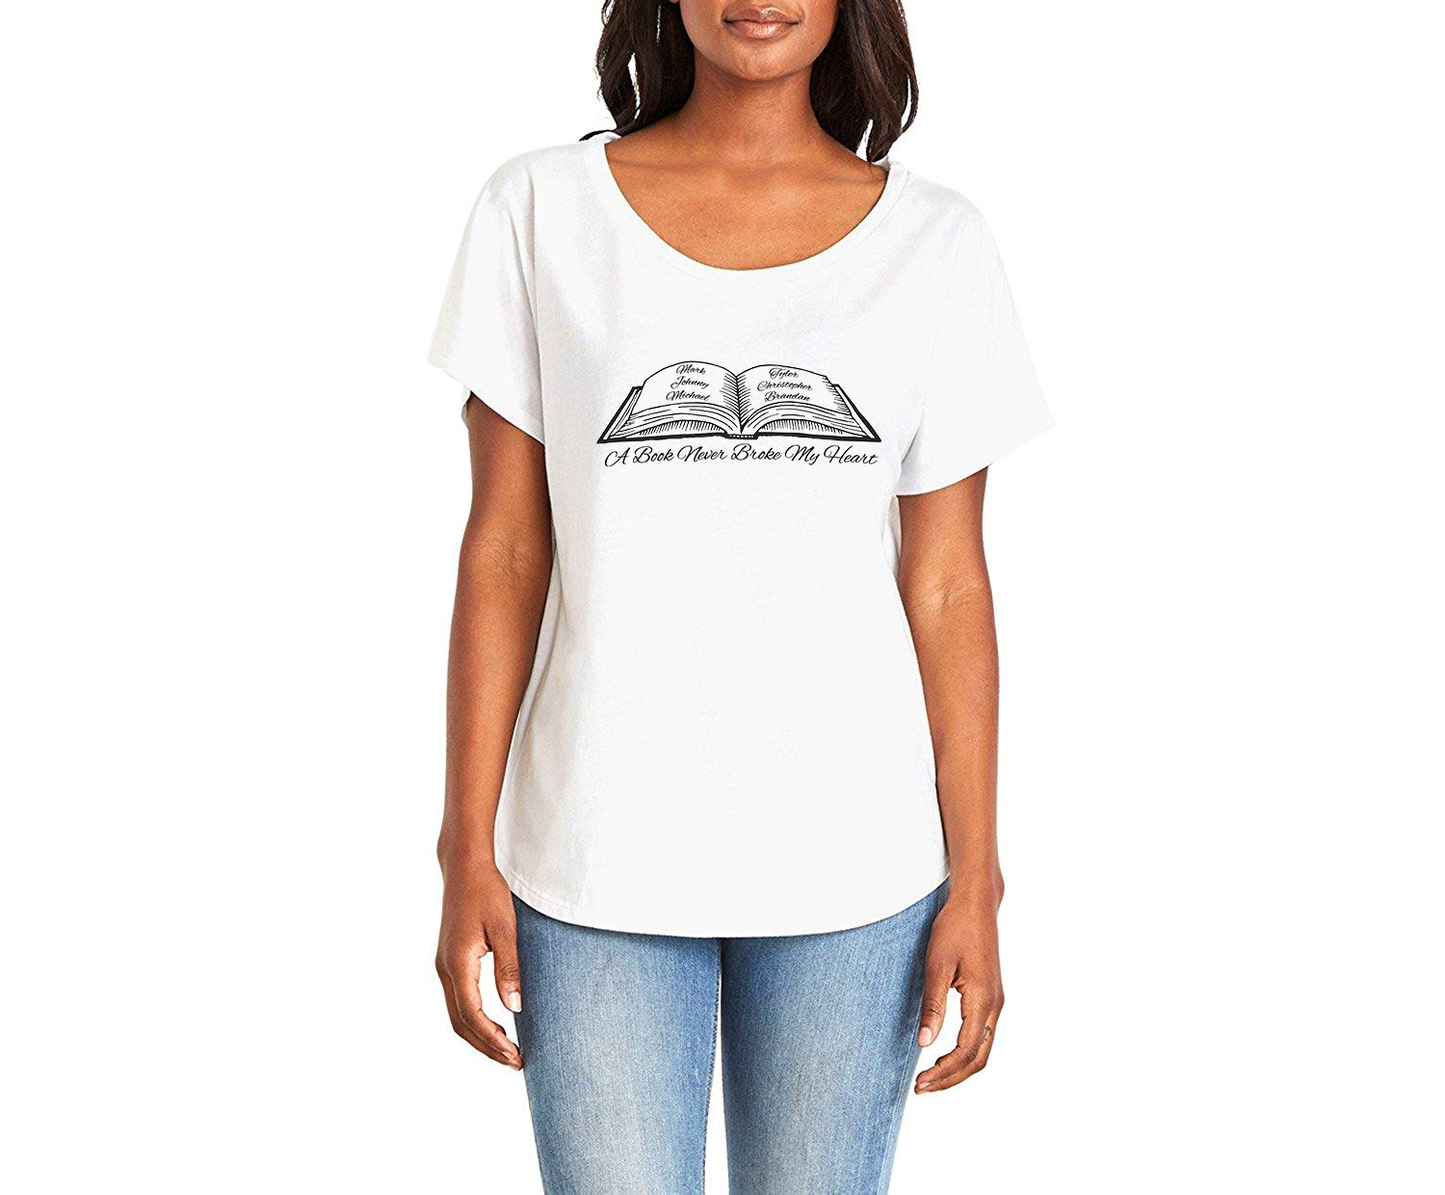 A Book Never Broke My Heart Ladies Tee Shirt - In Grey & White